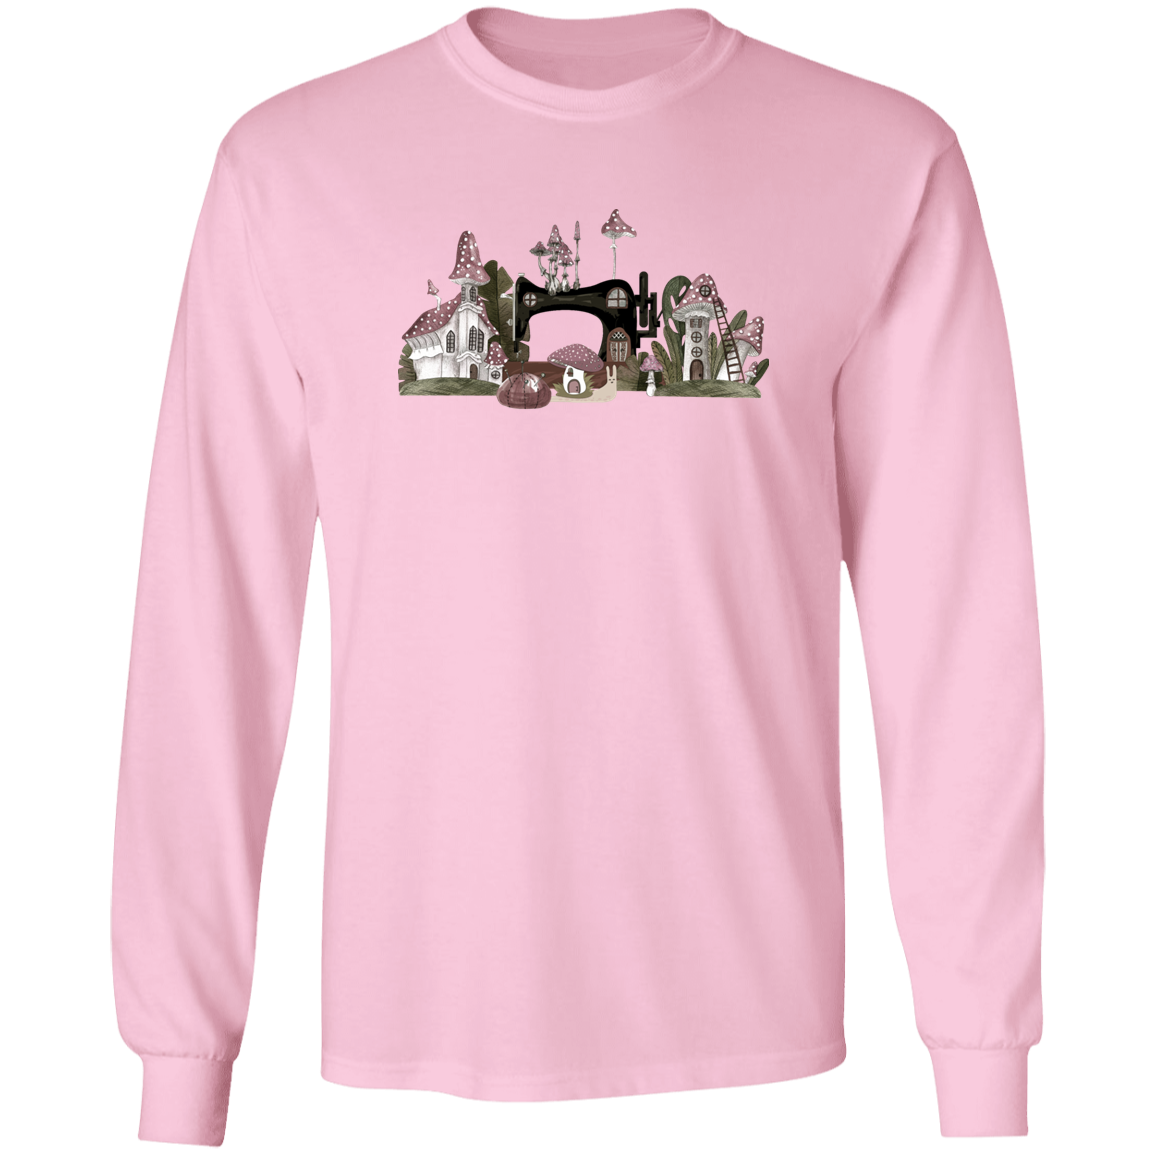 Cottagecore Sewing Mushroom Village Long Sleeve T-Shirt - Cute Gift for Sewing Friends